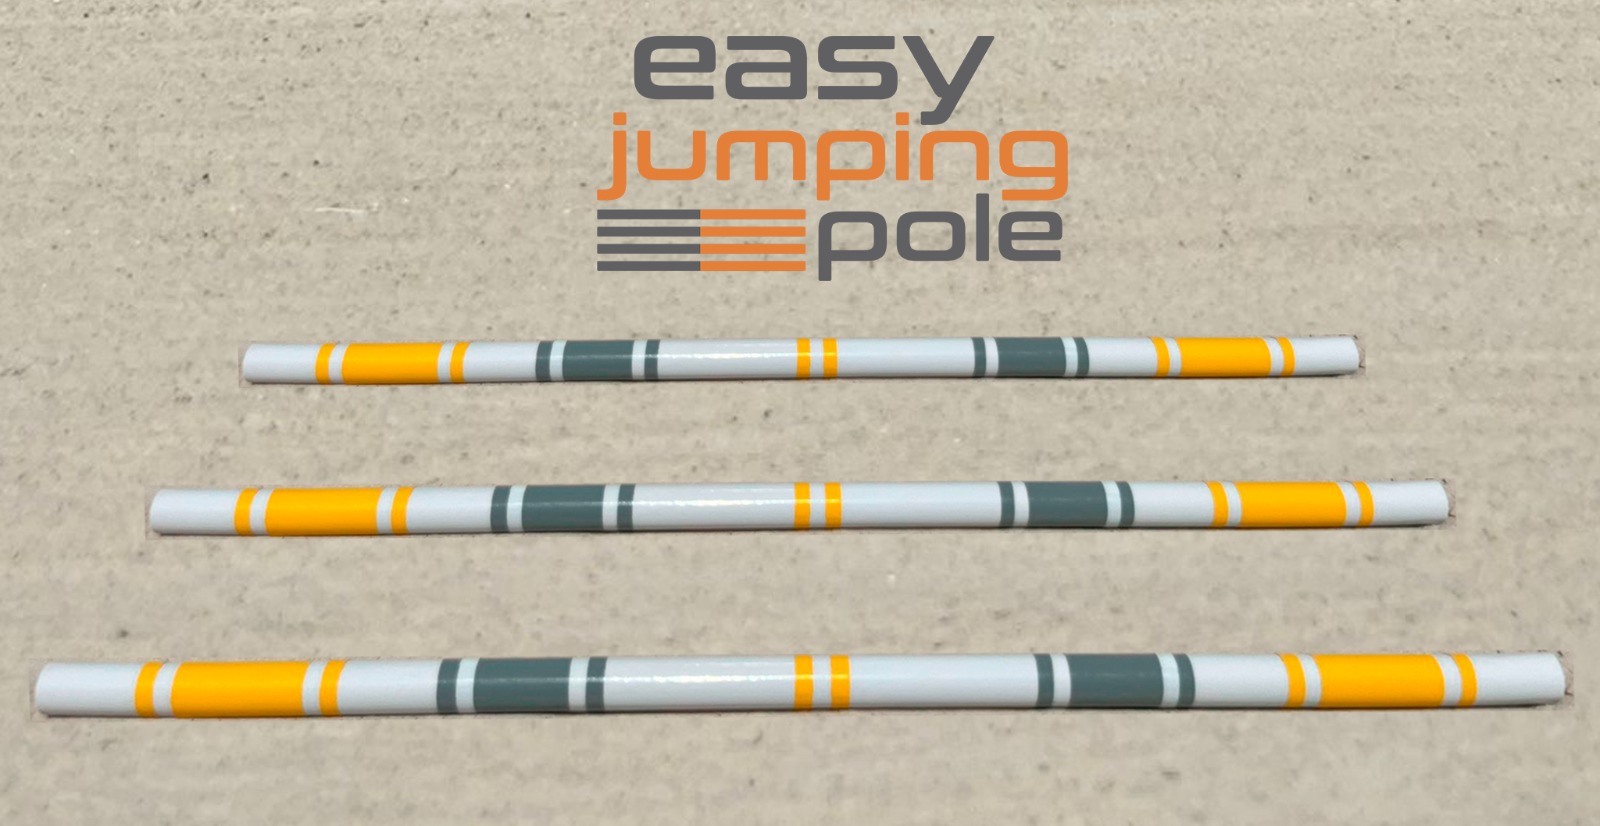 Easy jumping pole Model A-7